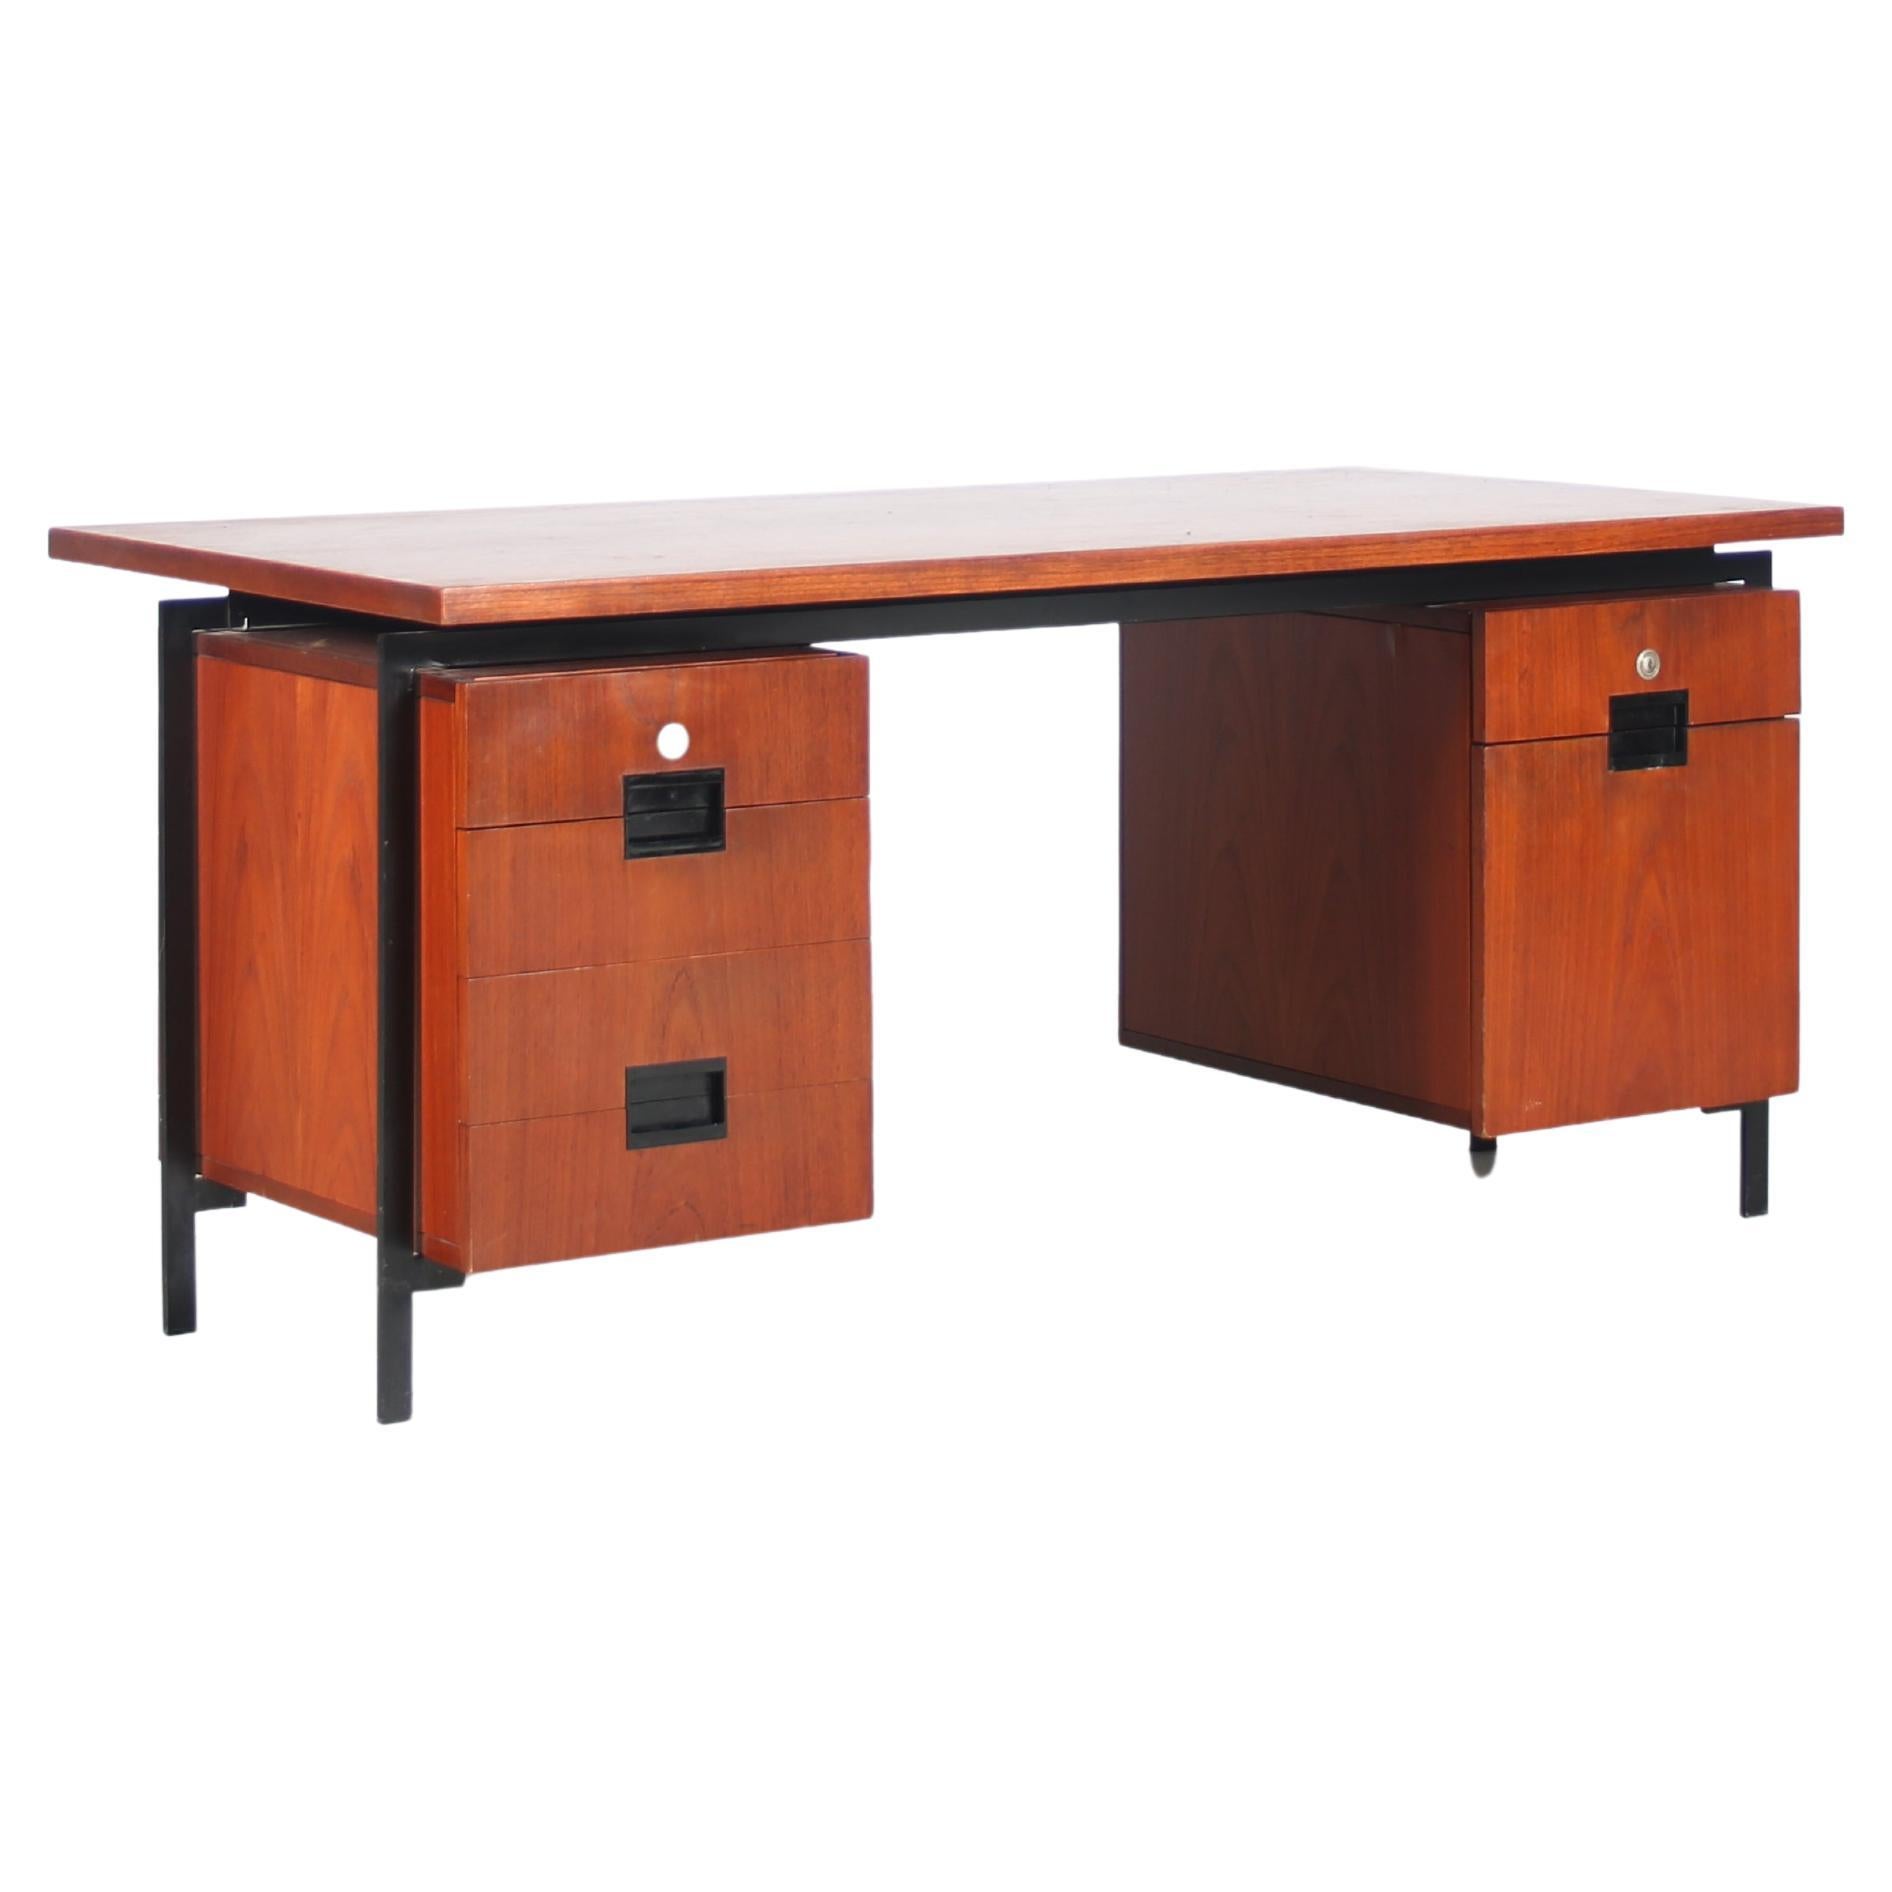 “Japanese Series” Desk by Cees Braakman for Pastoe, Netherlands 1960 For Sale